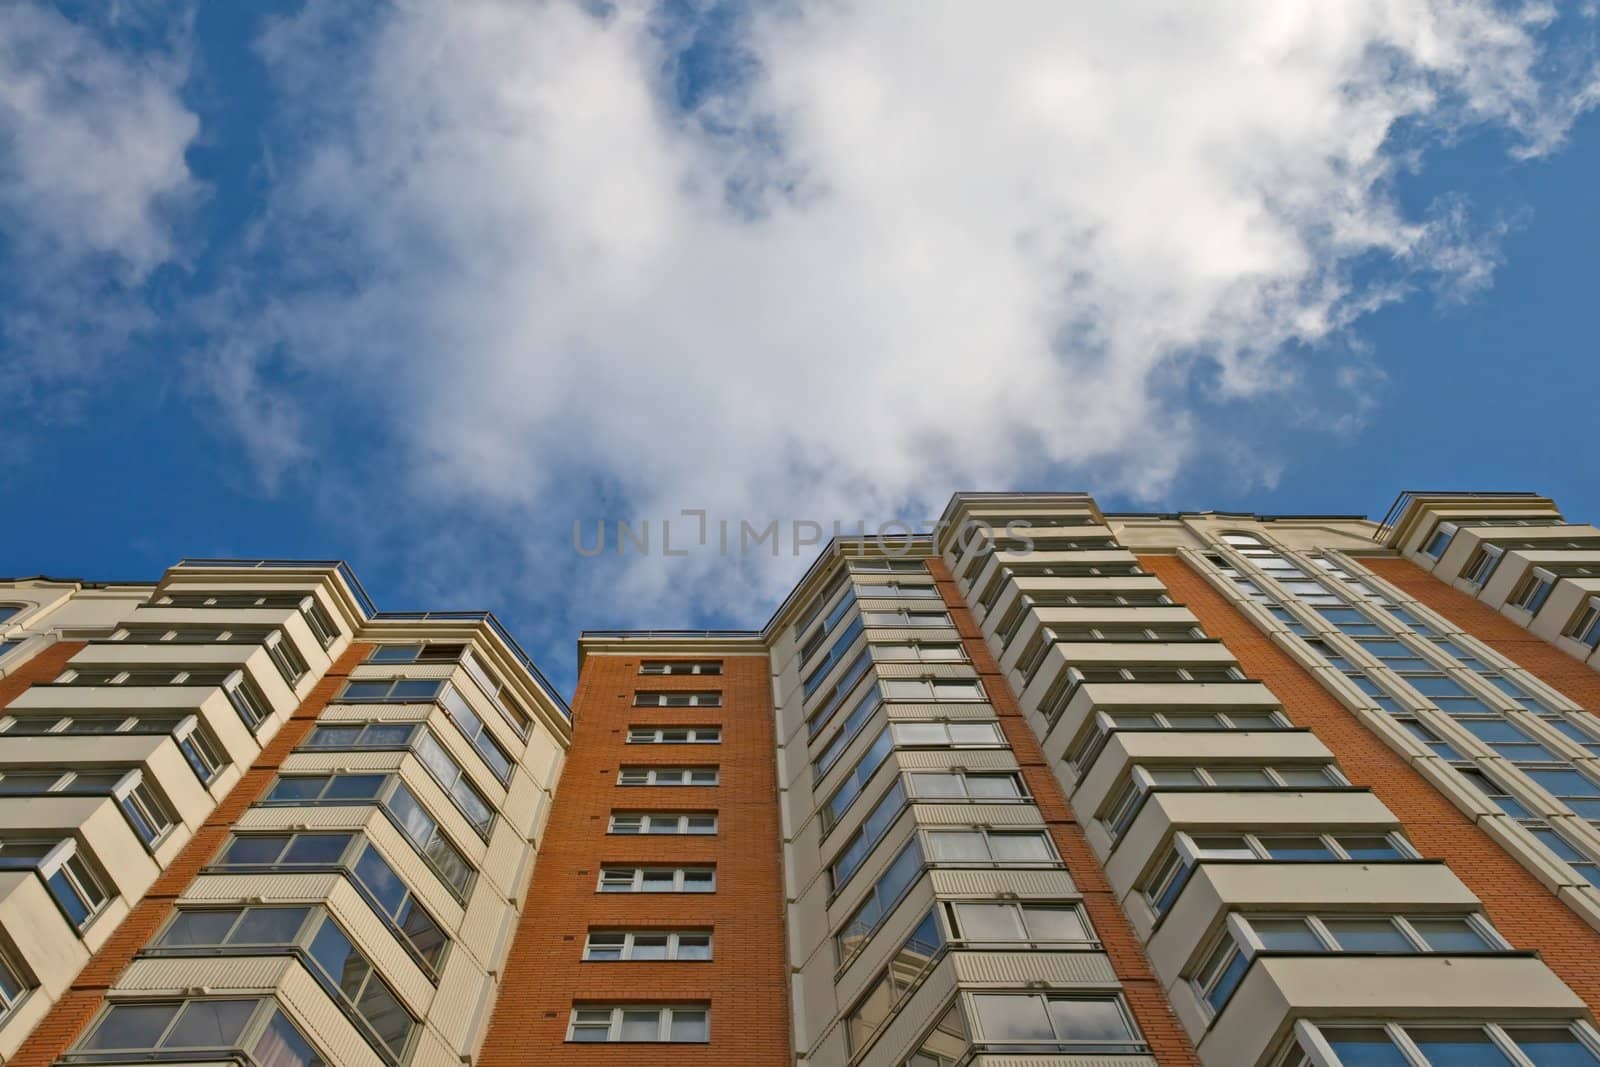 A residential multistory house and sky with clouds, view from below